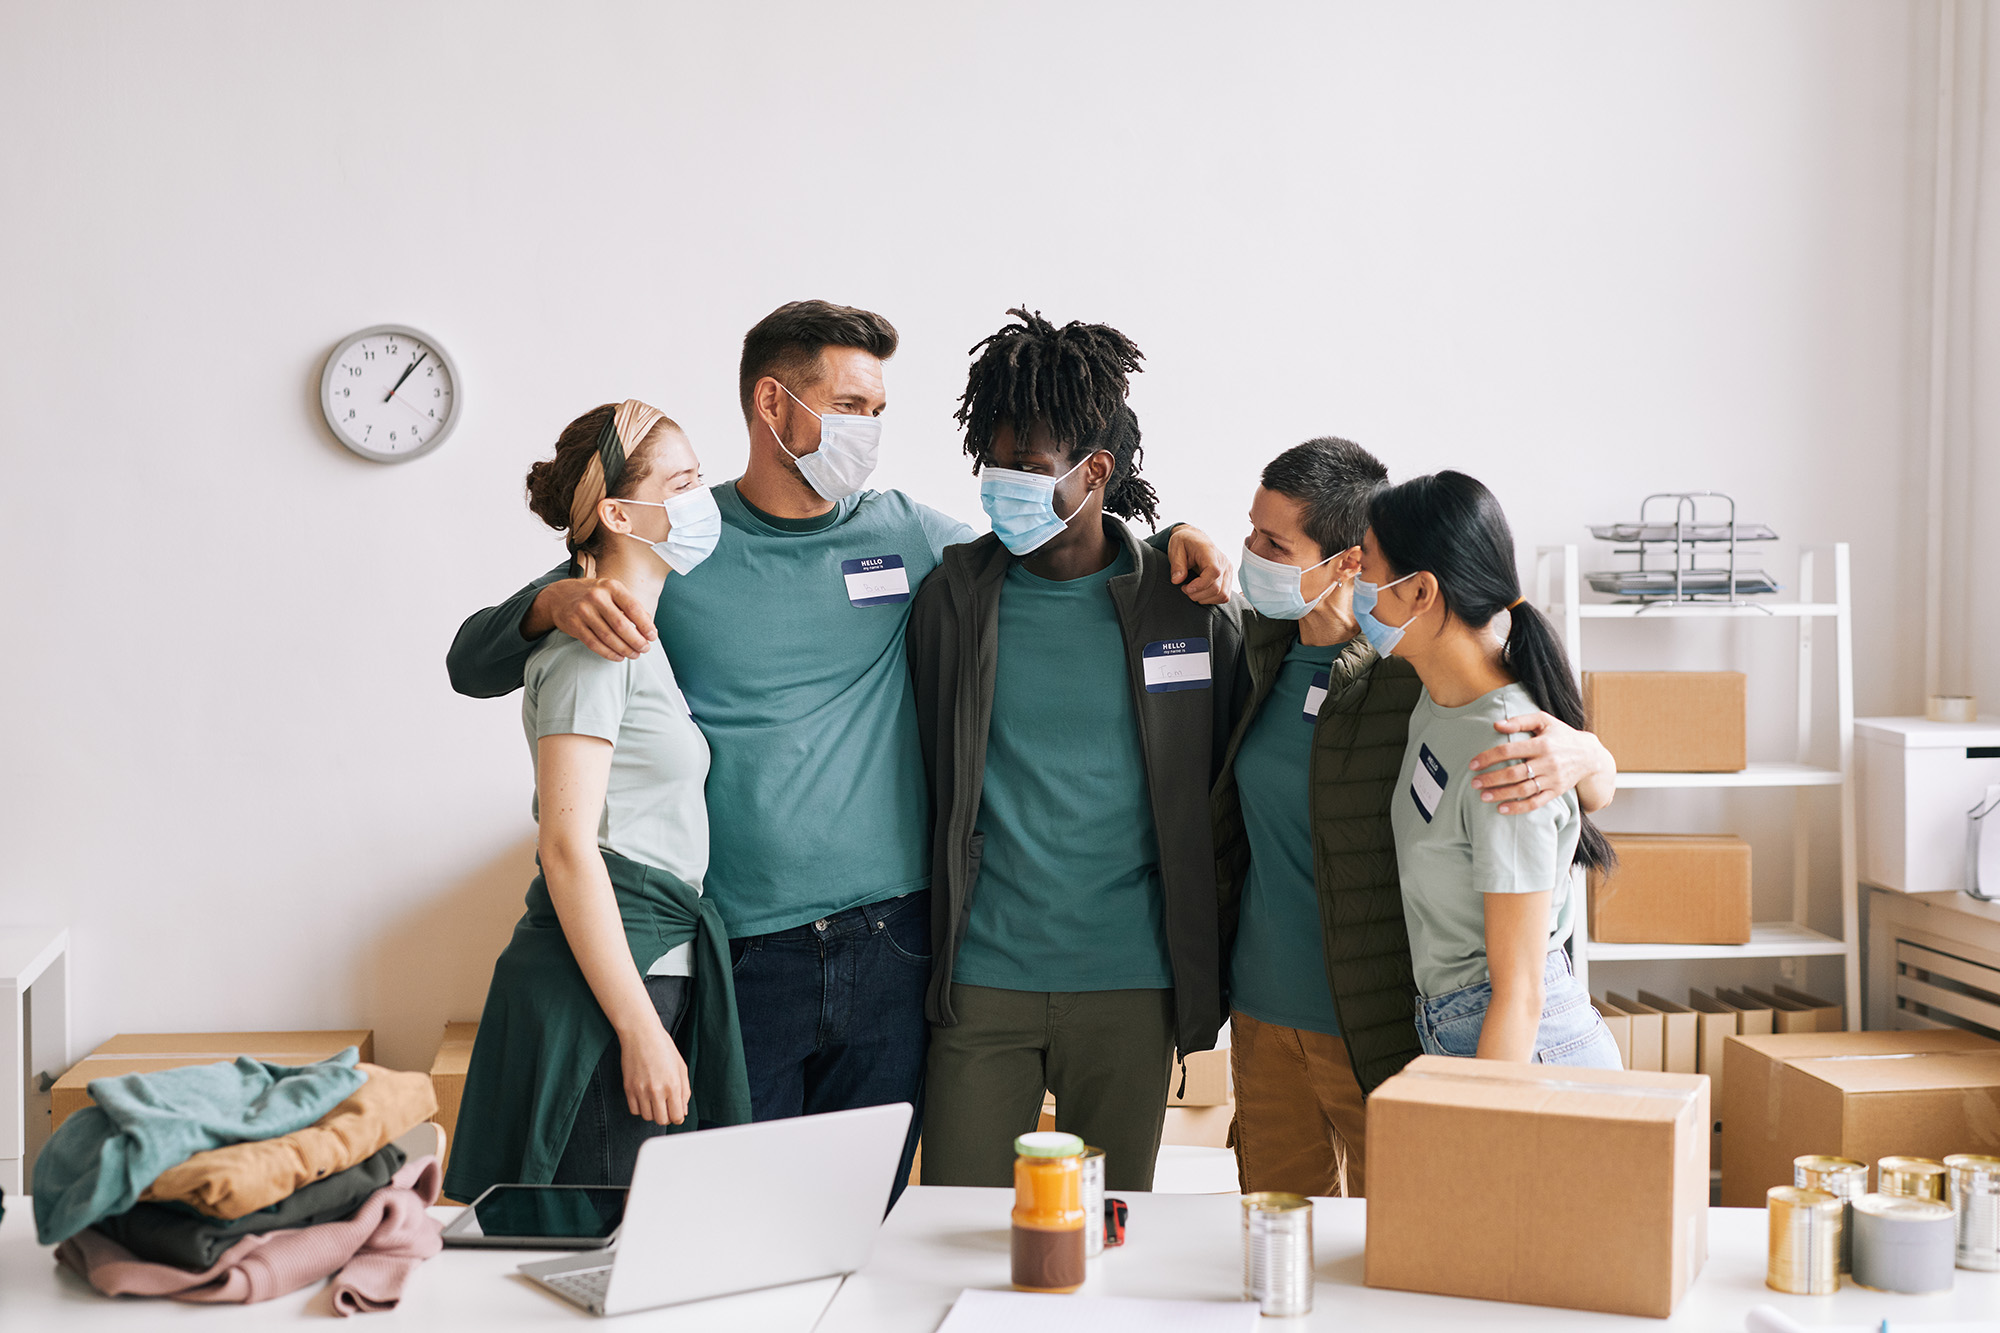 npo_when_yes (Diverse team of volunteers wearing masks while embracing at help and donation event)